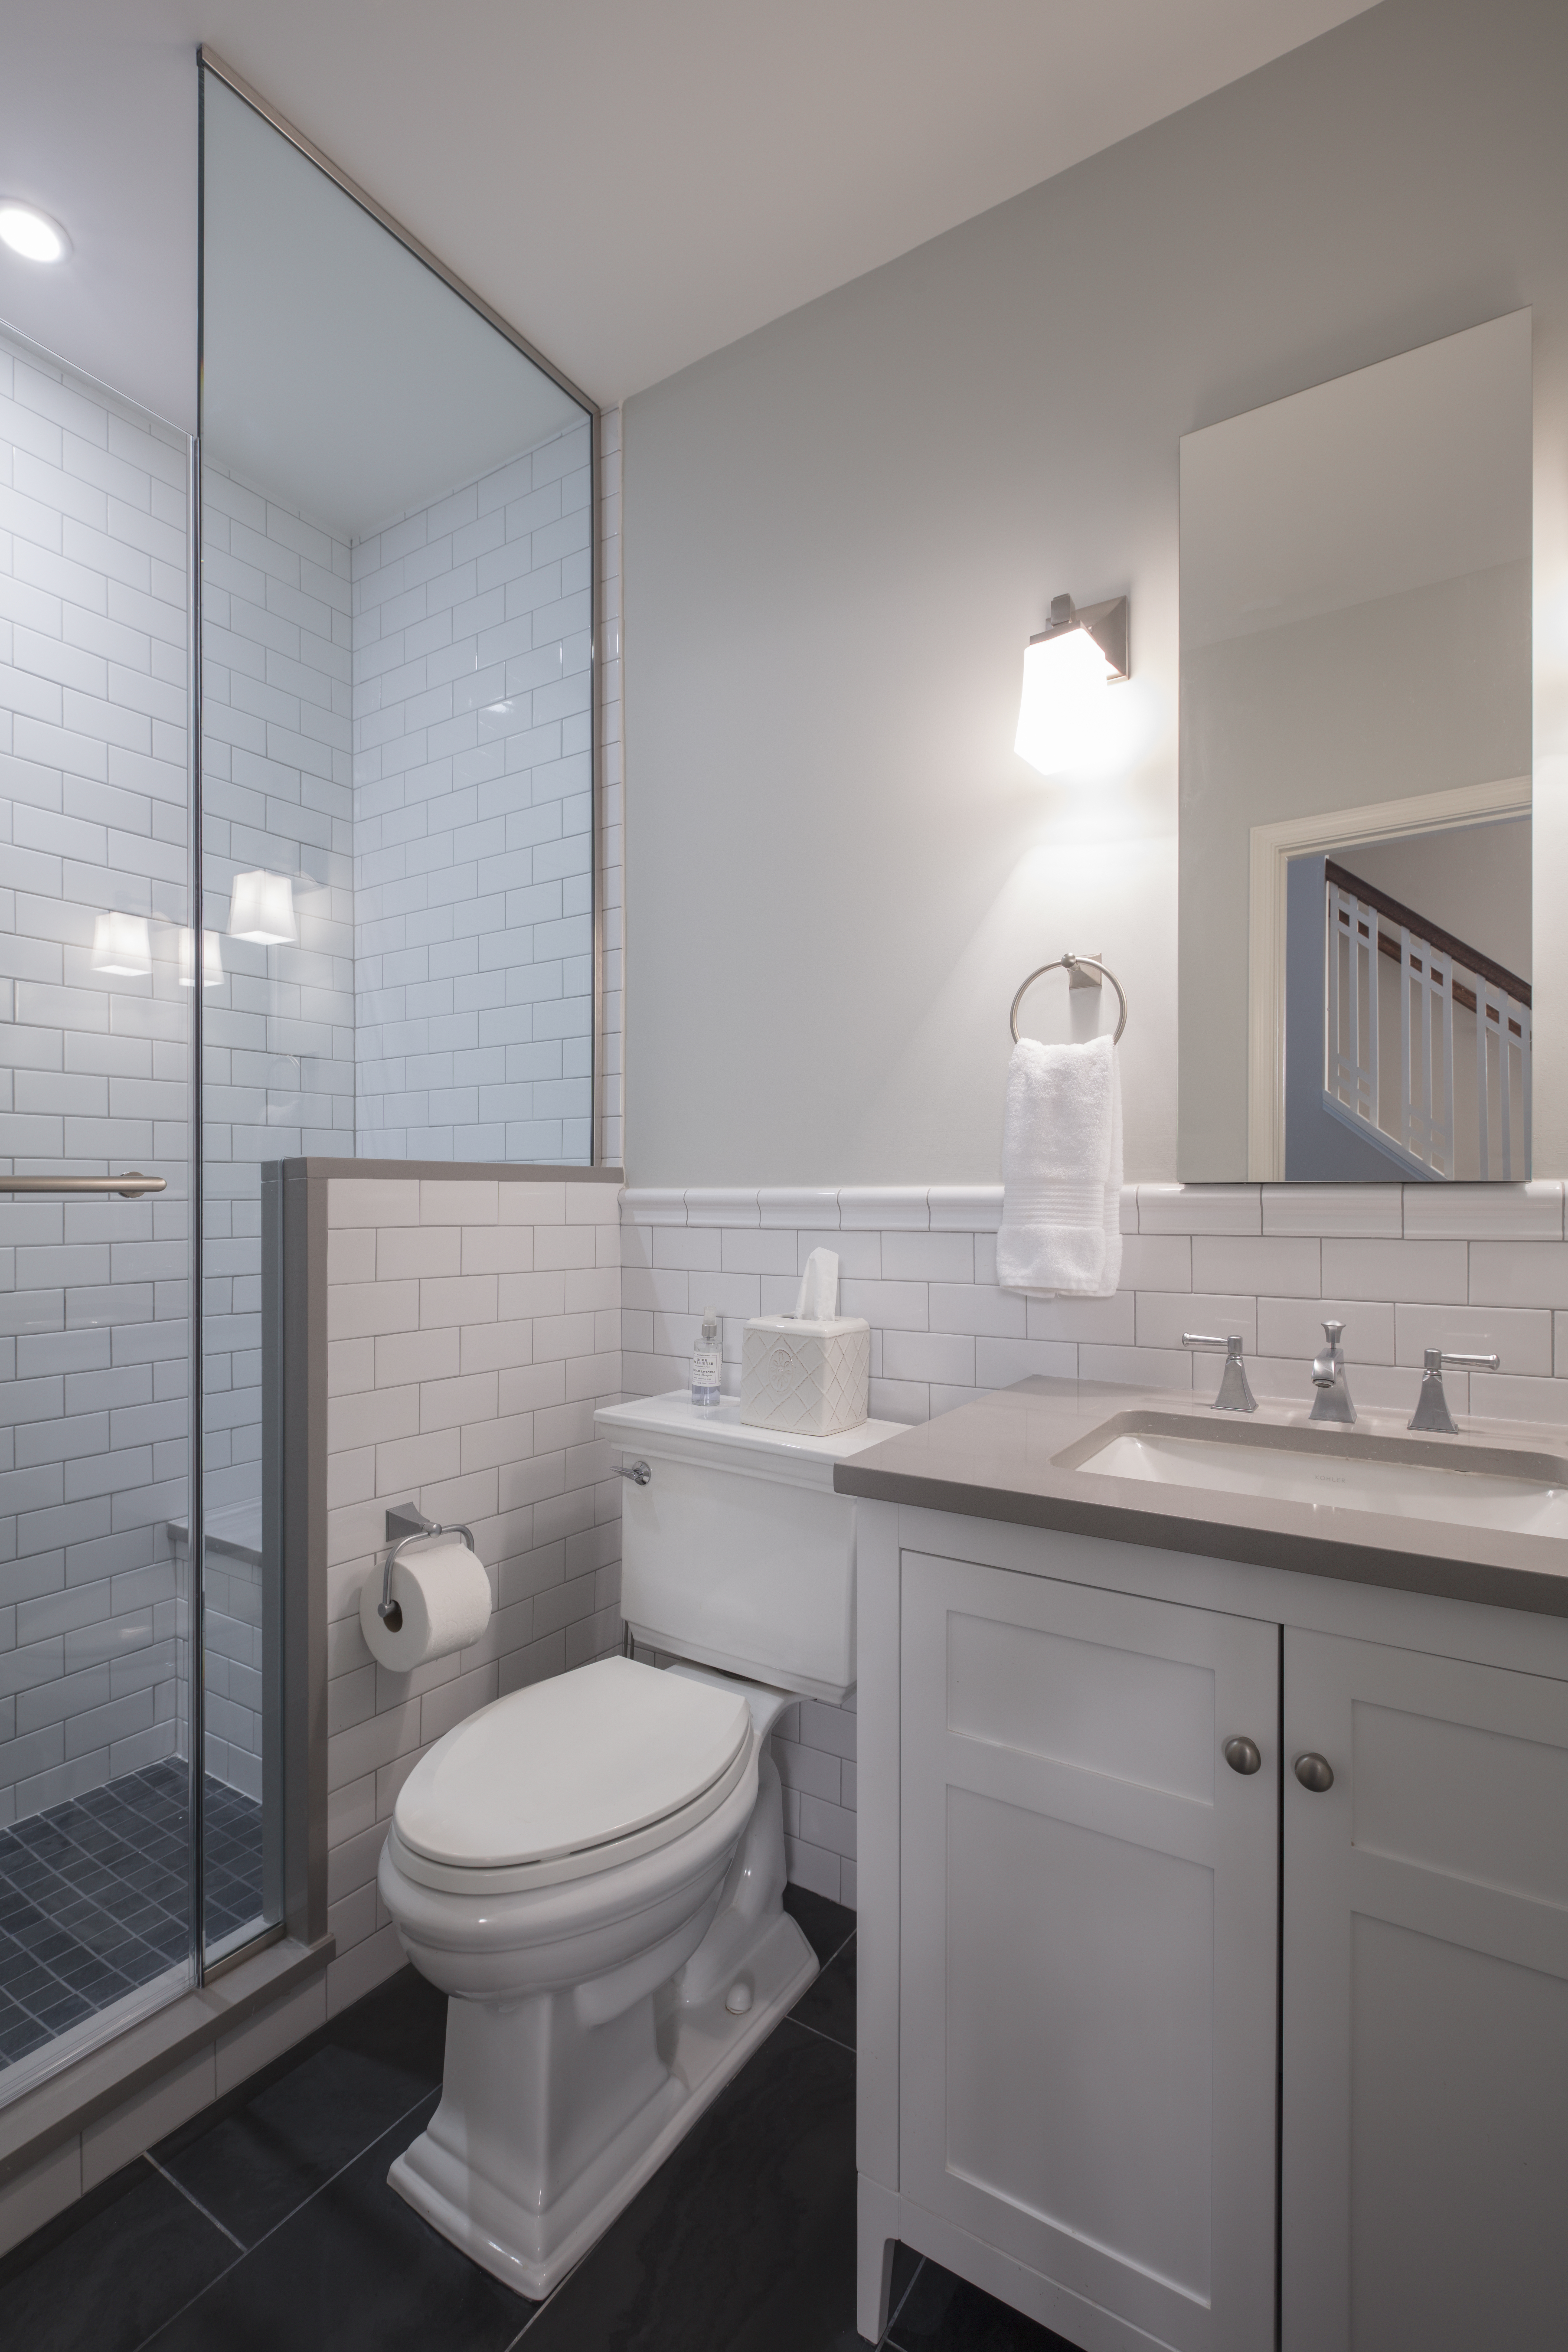 Bathroom Remodel in the Cloisters